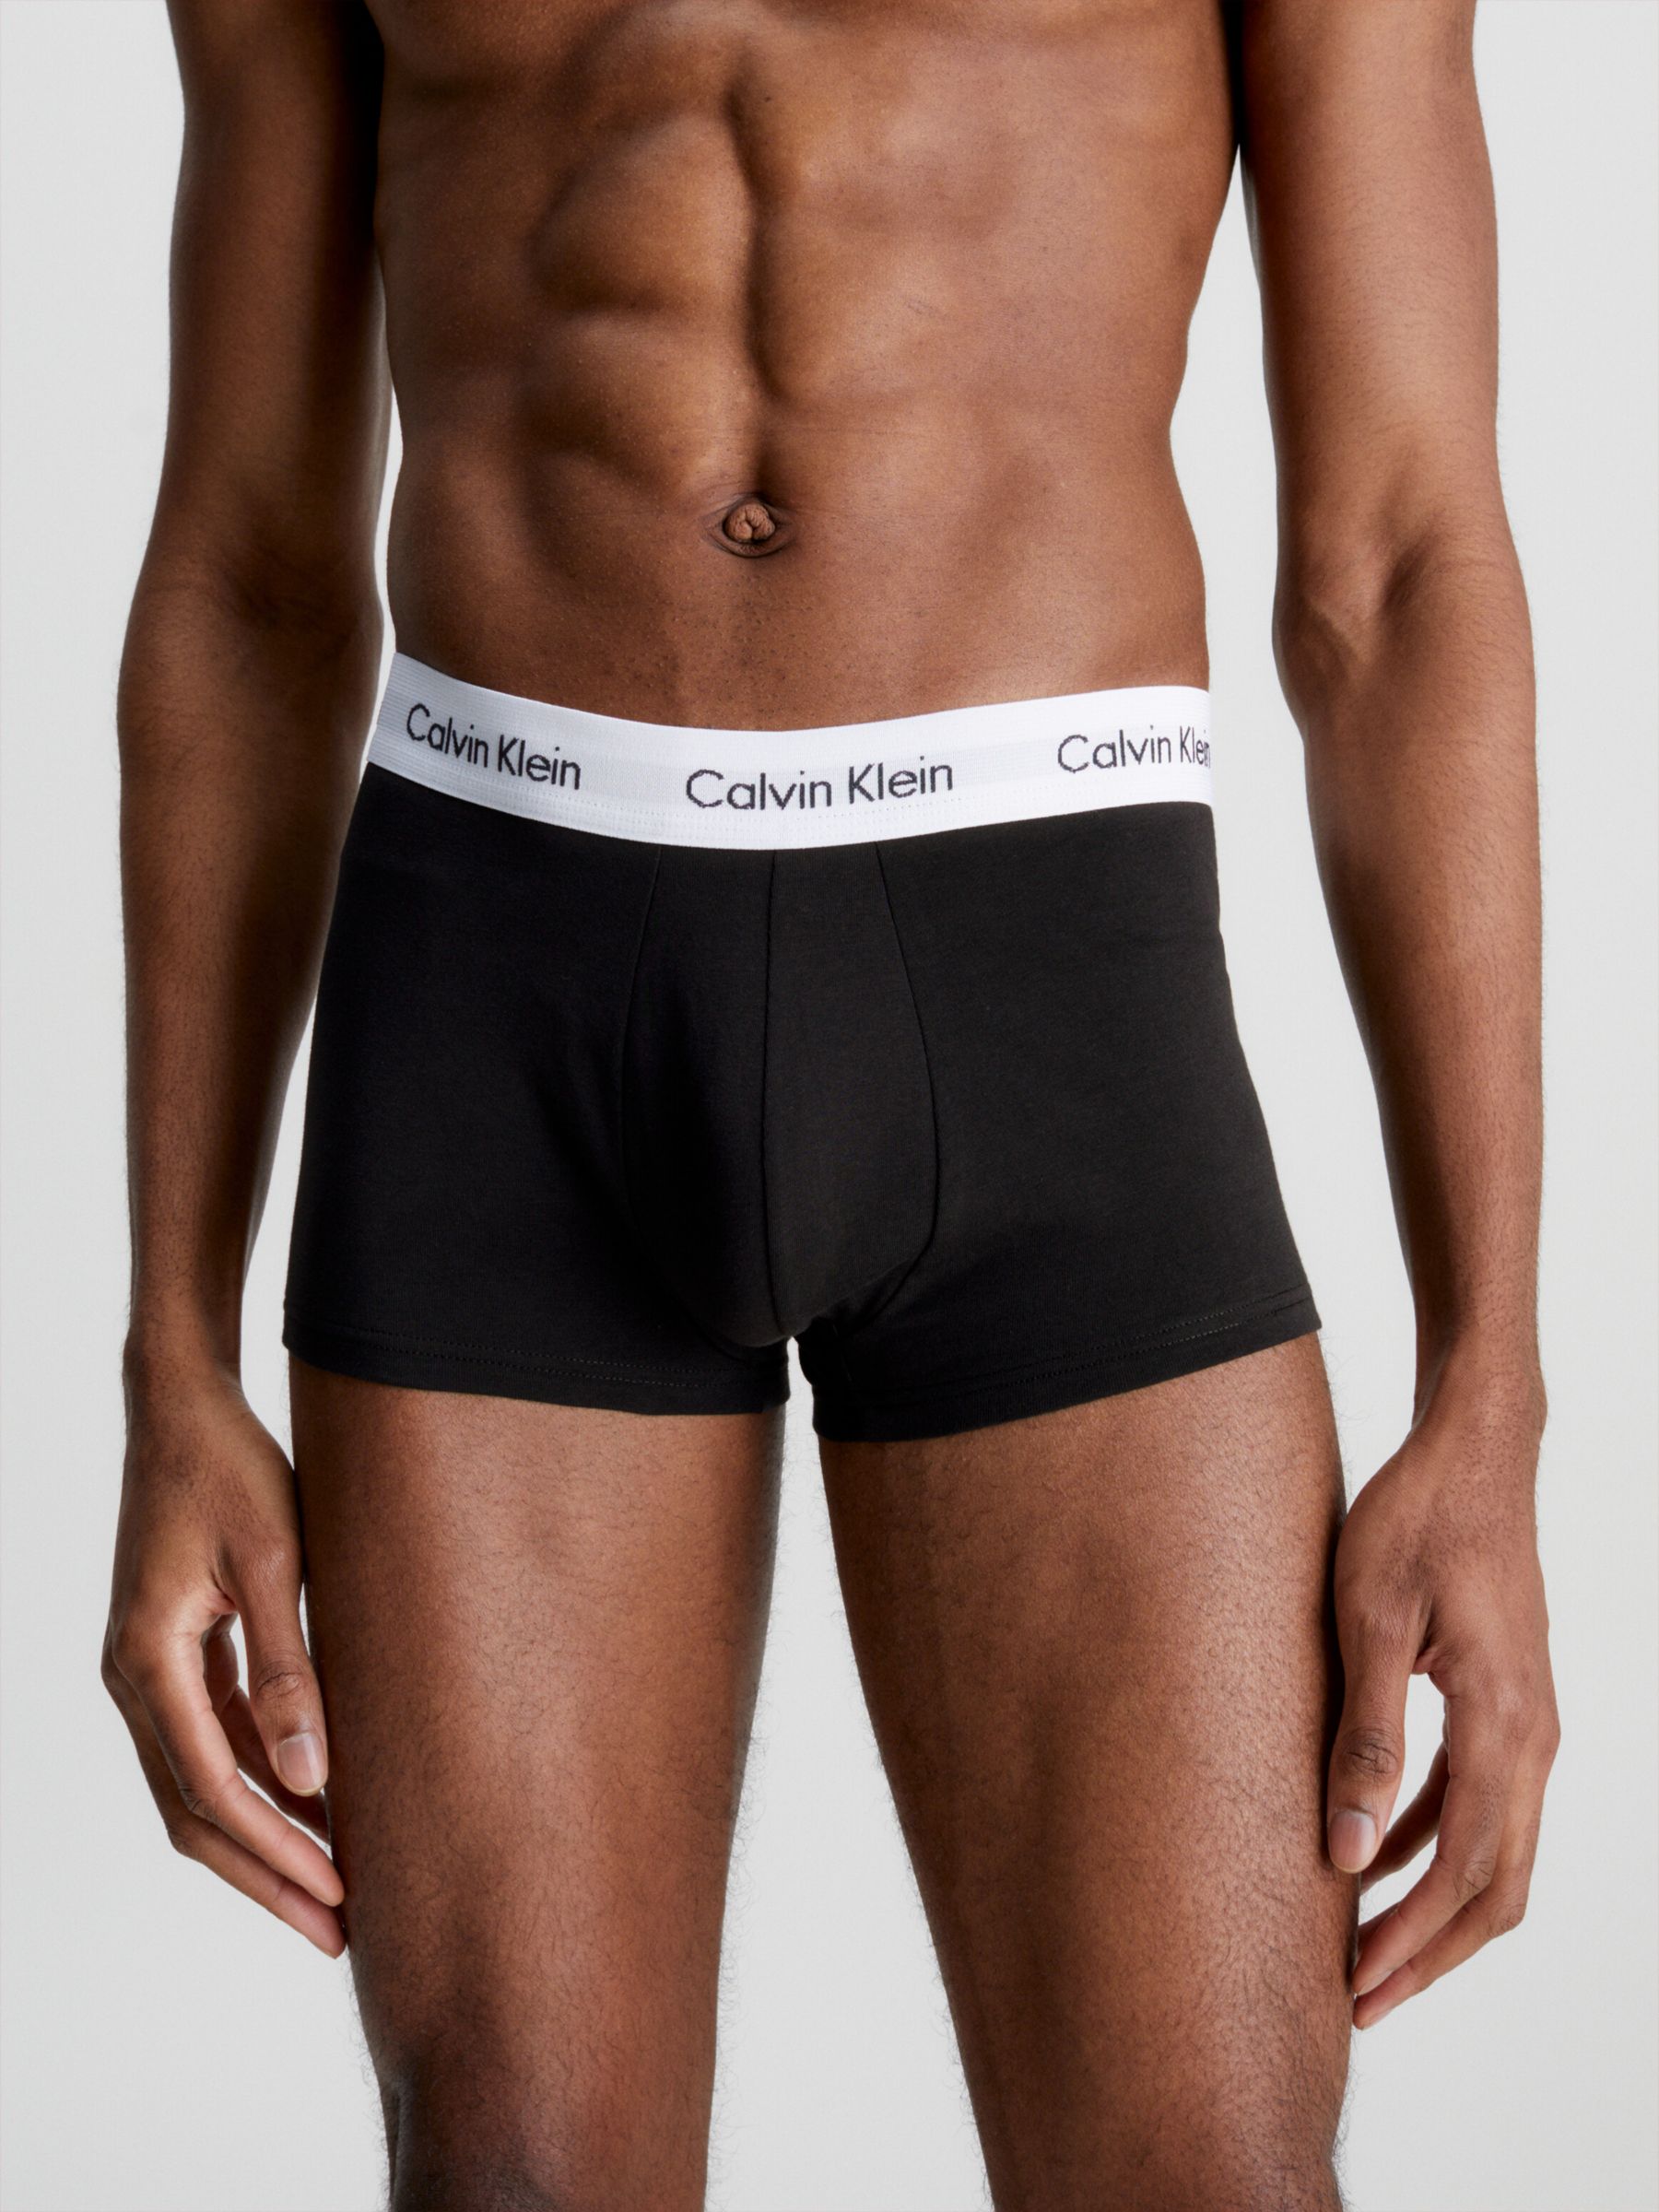 Calvin Klein Low Rise Cotton Stretch Trunks, Pack of 3, Black, XS